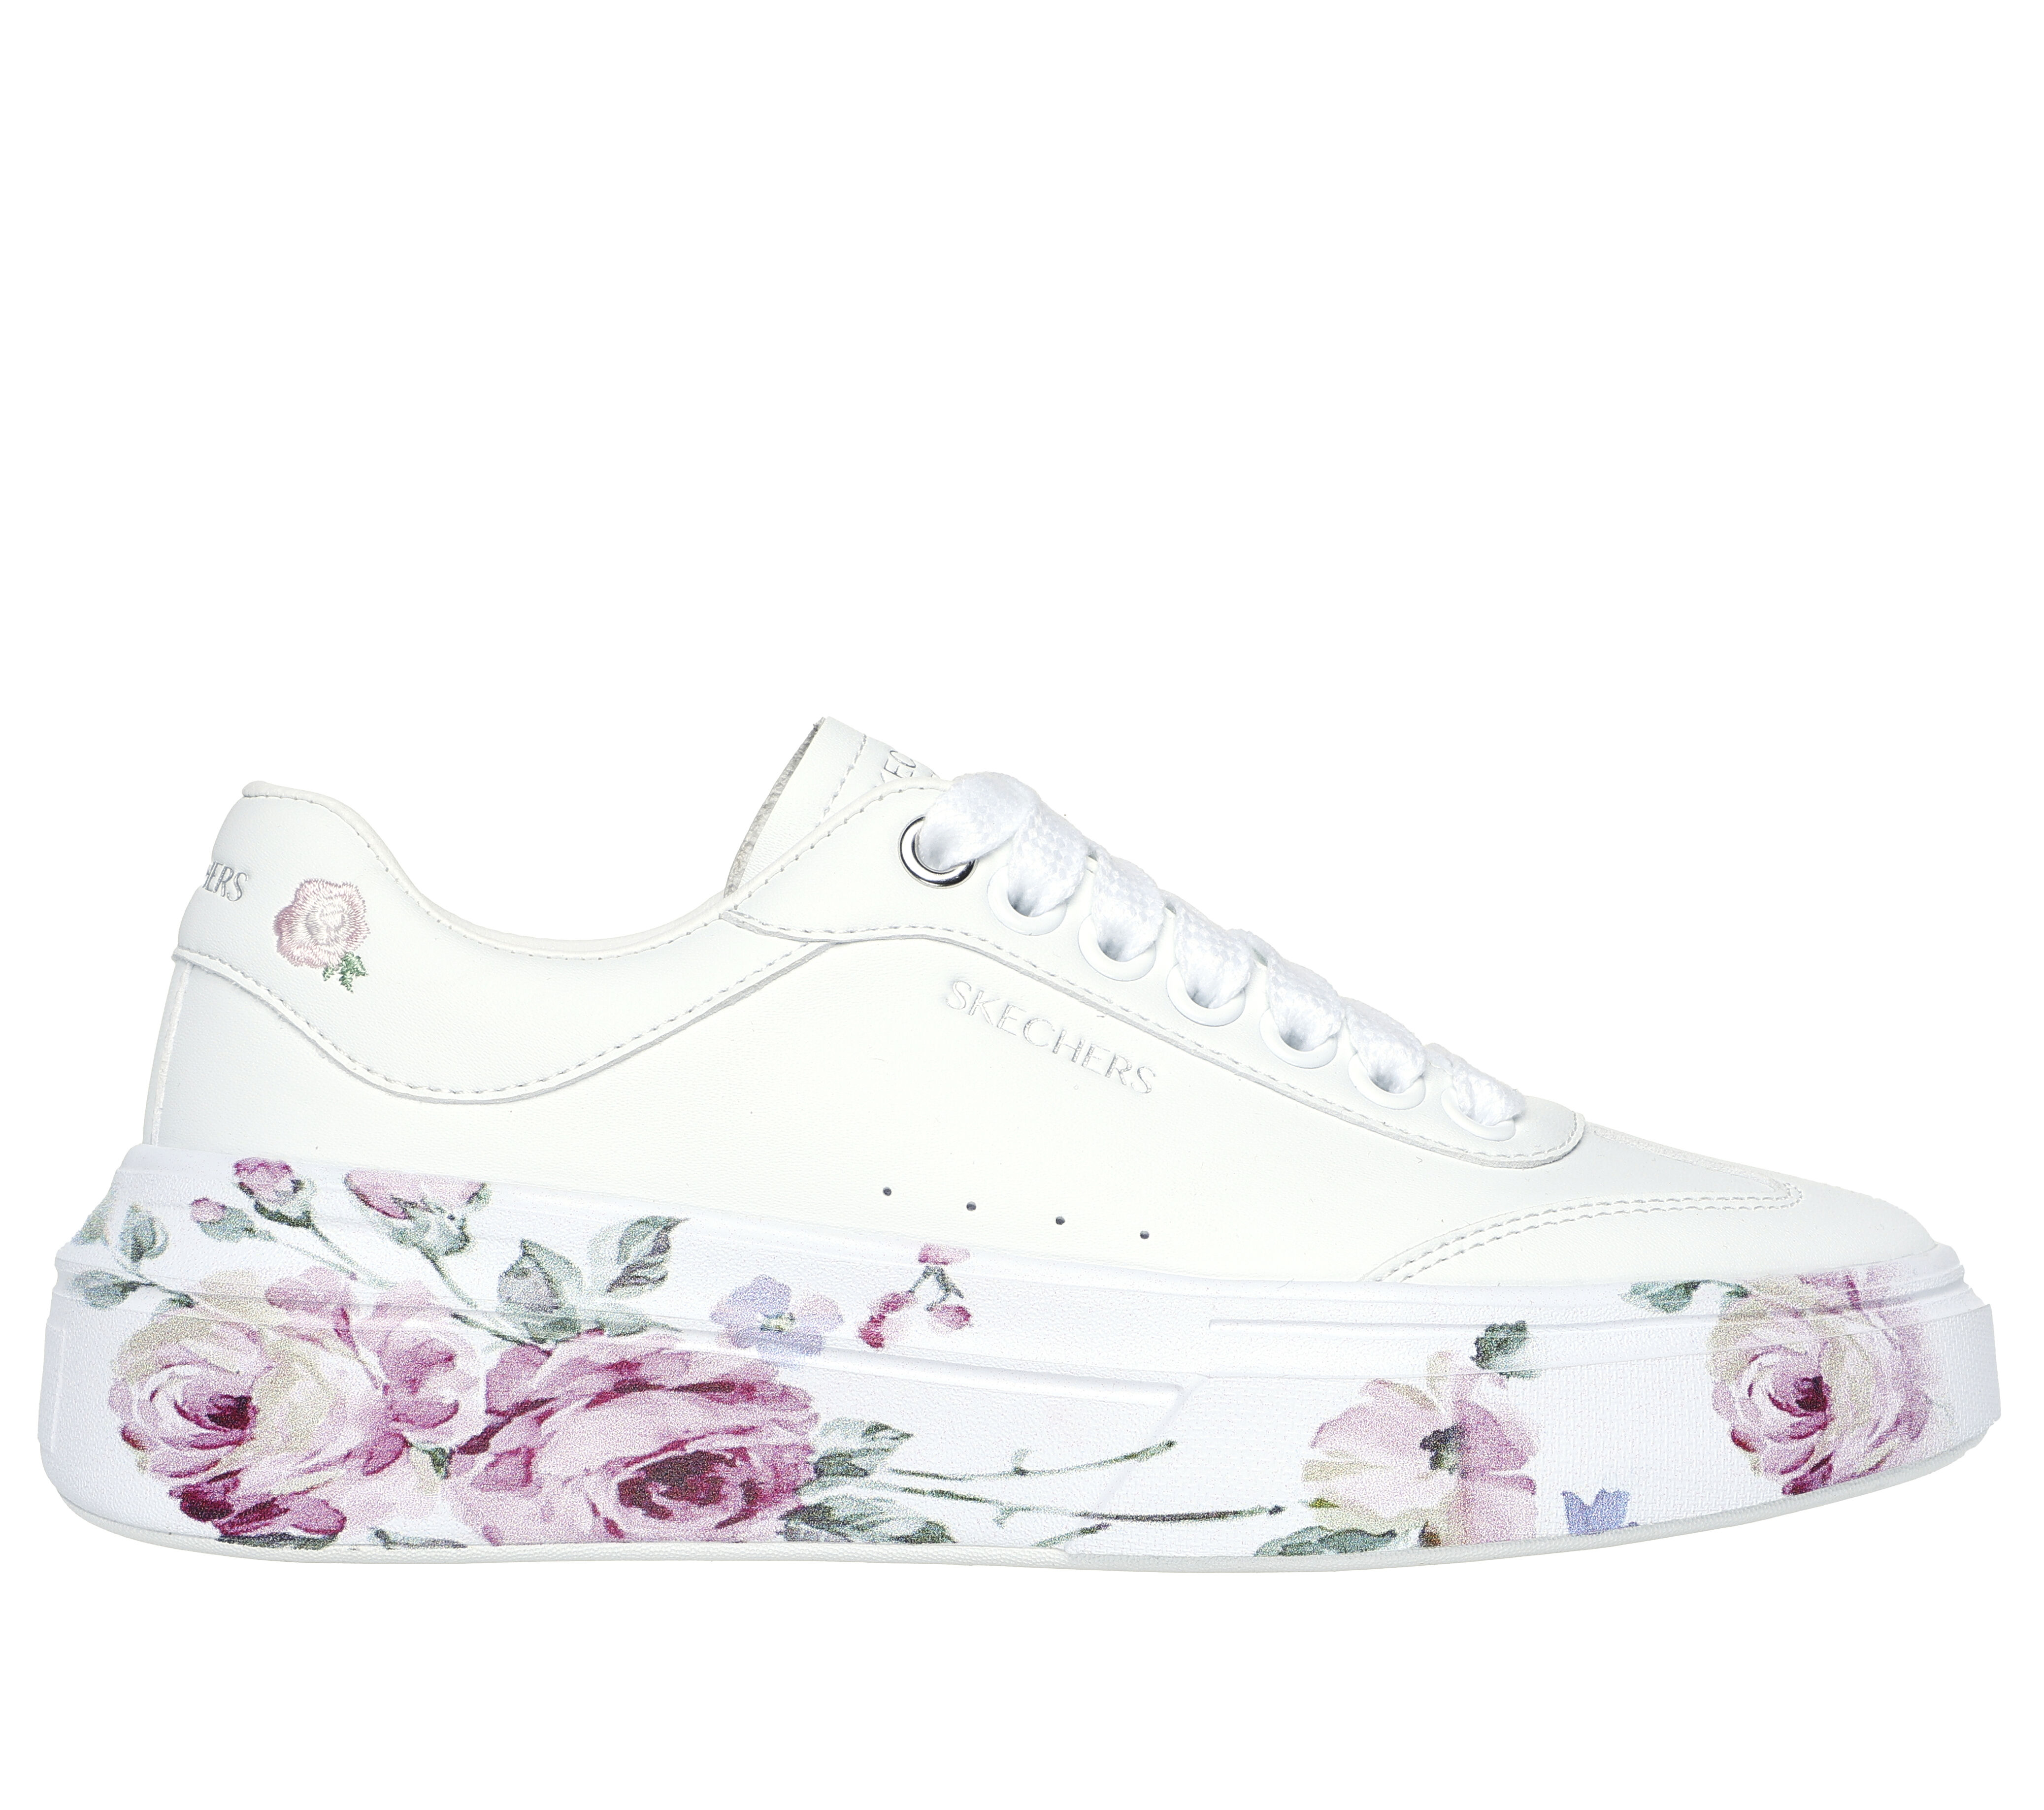 Cordova Classic - Painted Florals | SKECHERS